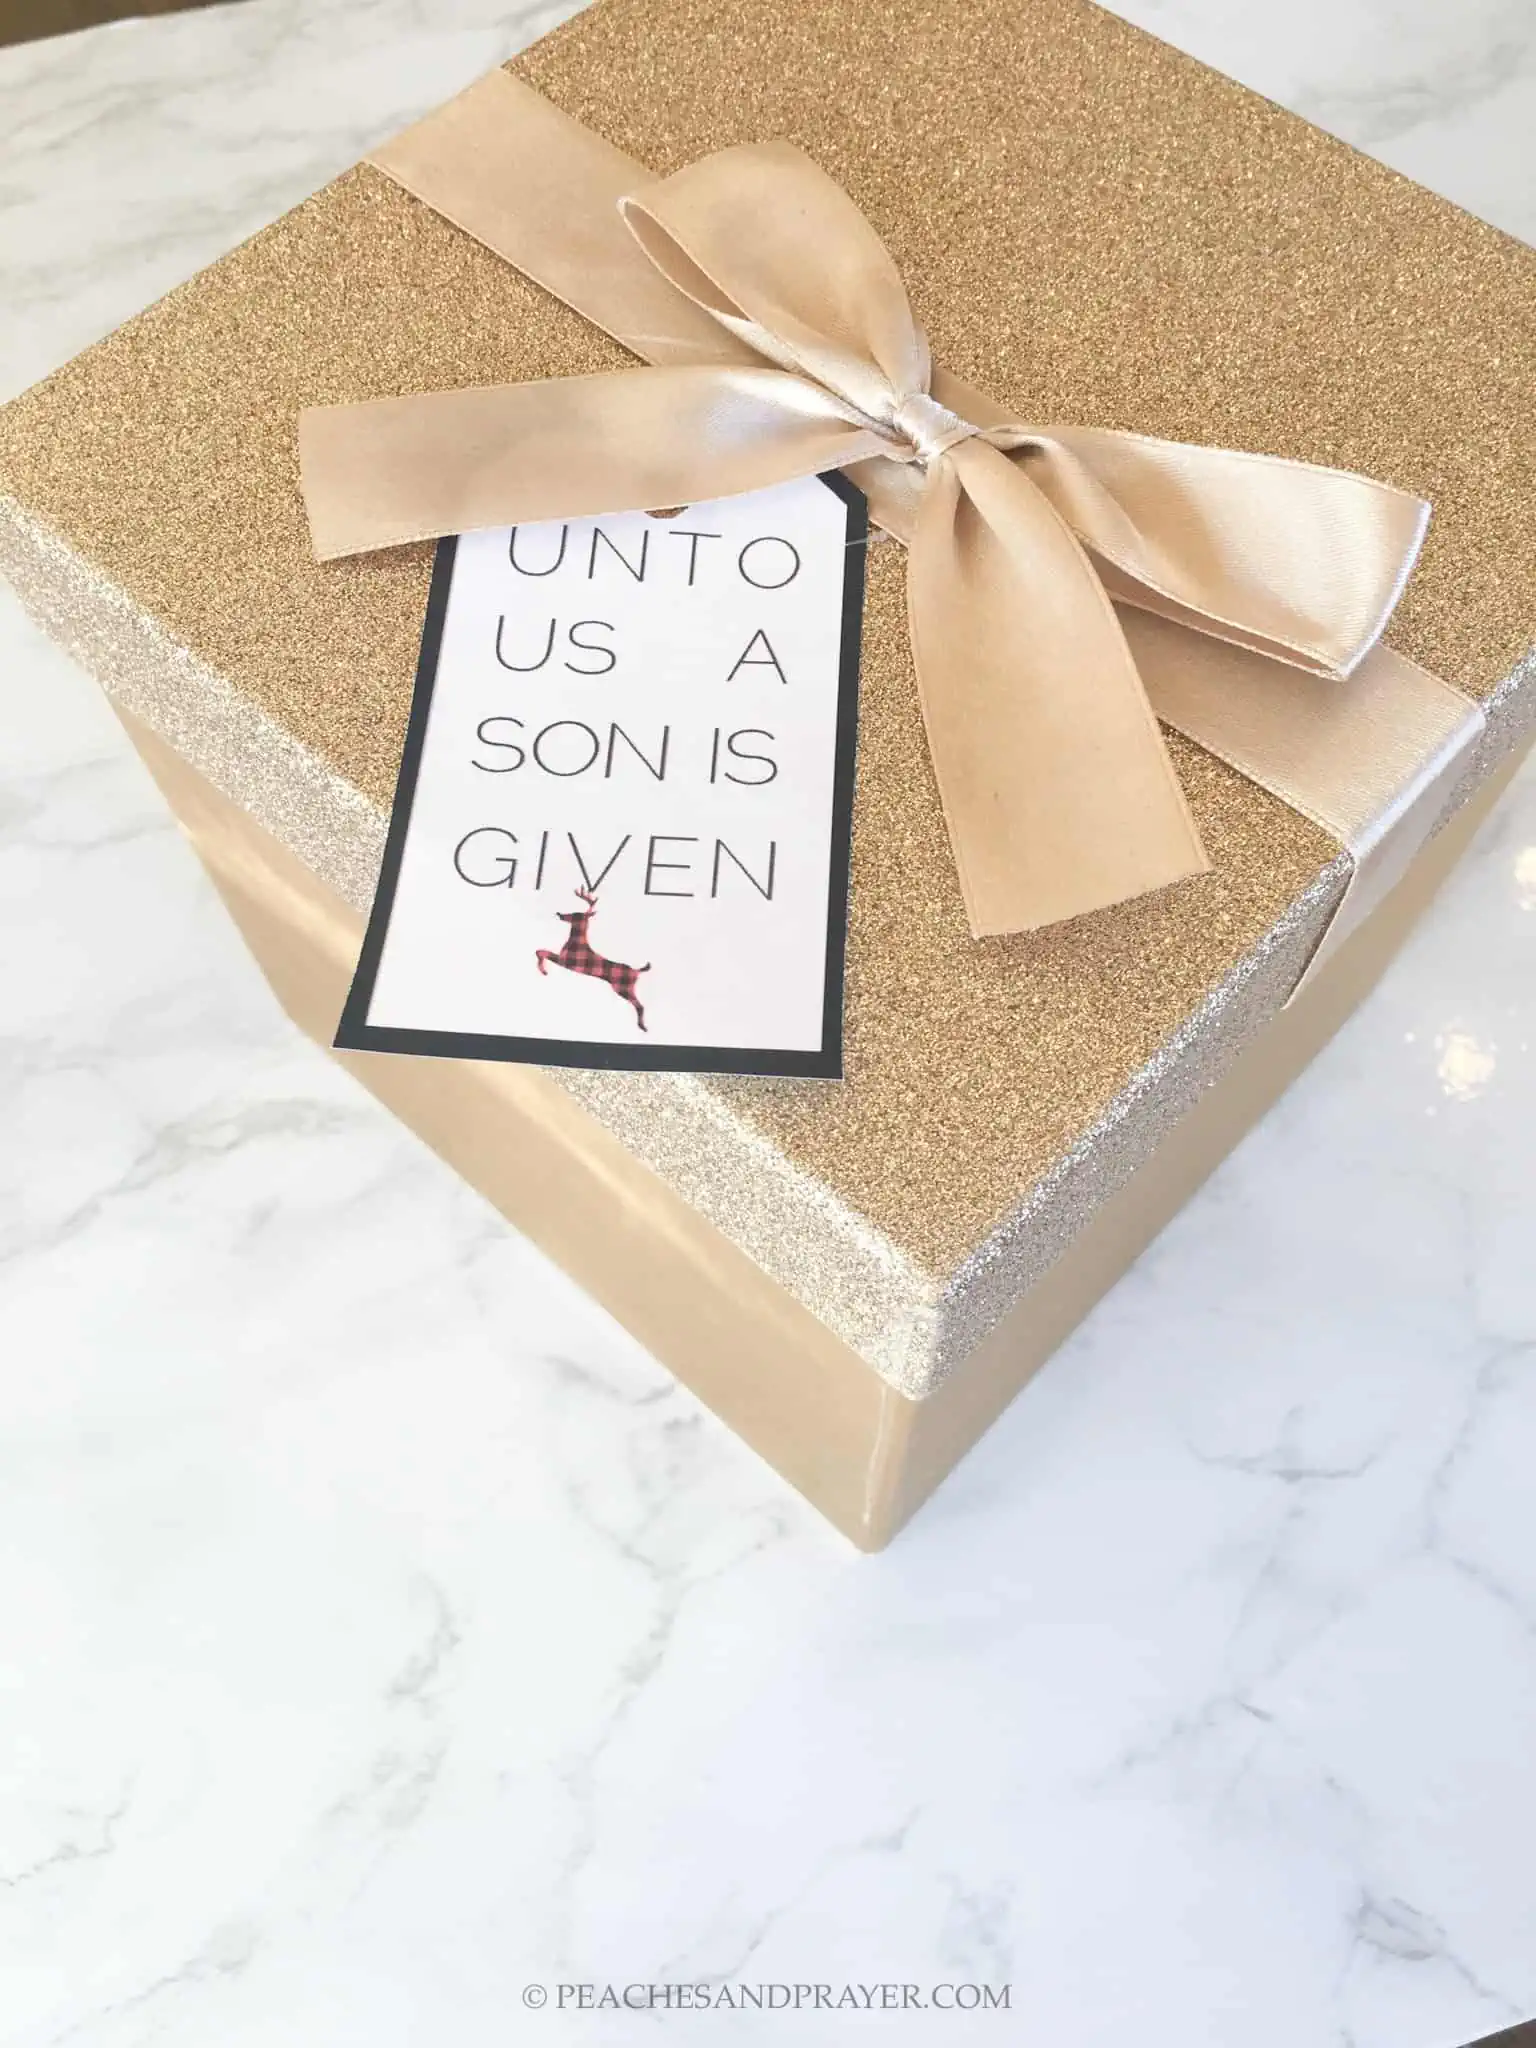 16 Free Printable Christmas Gift Tags That Point to Jesus